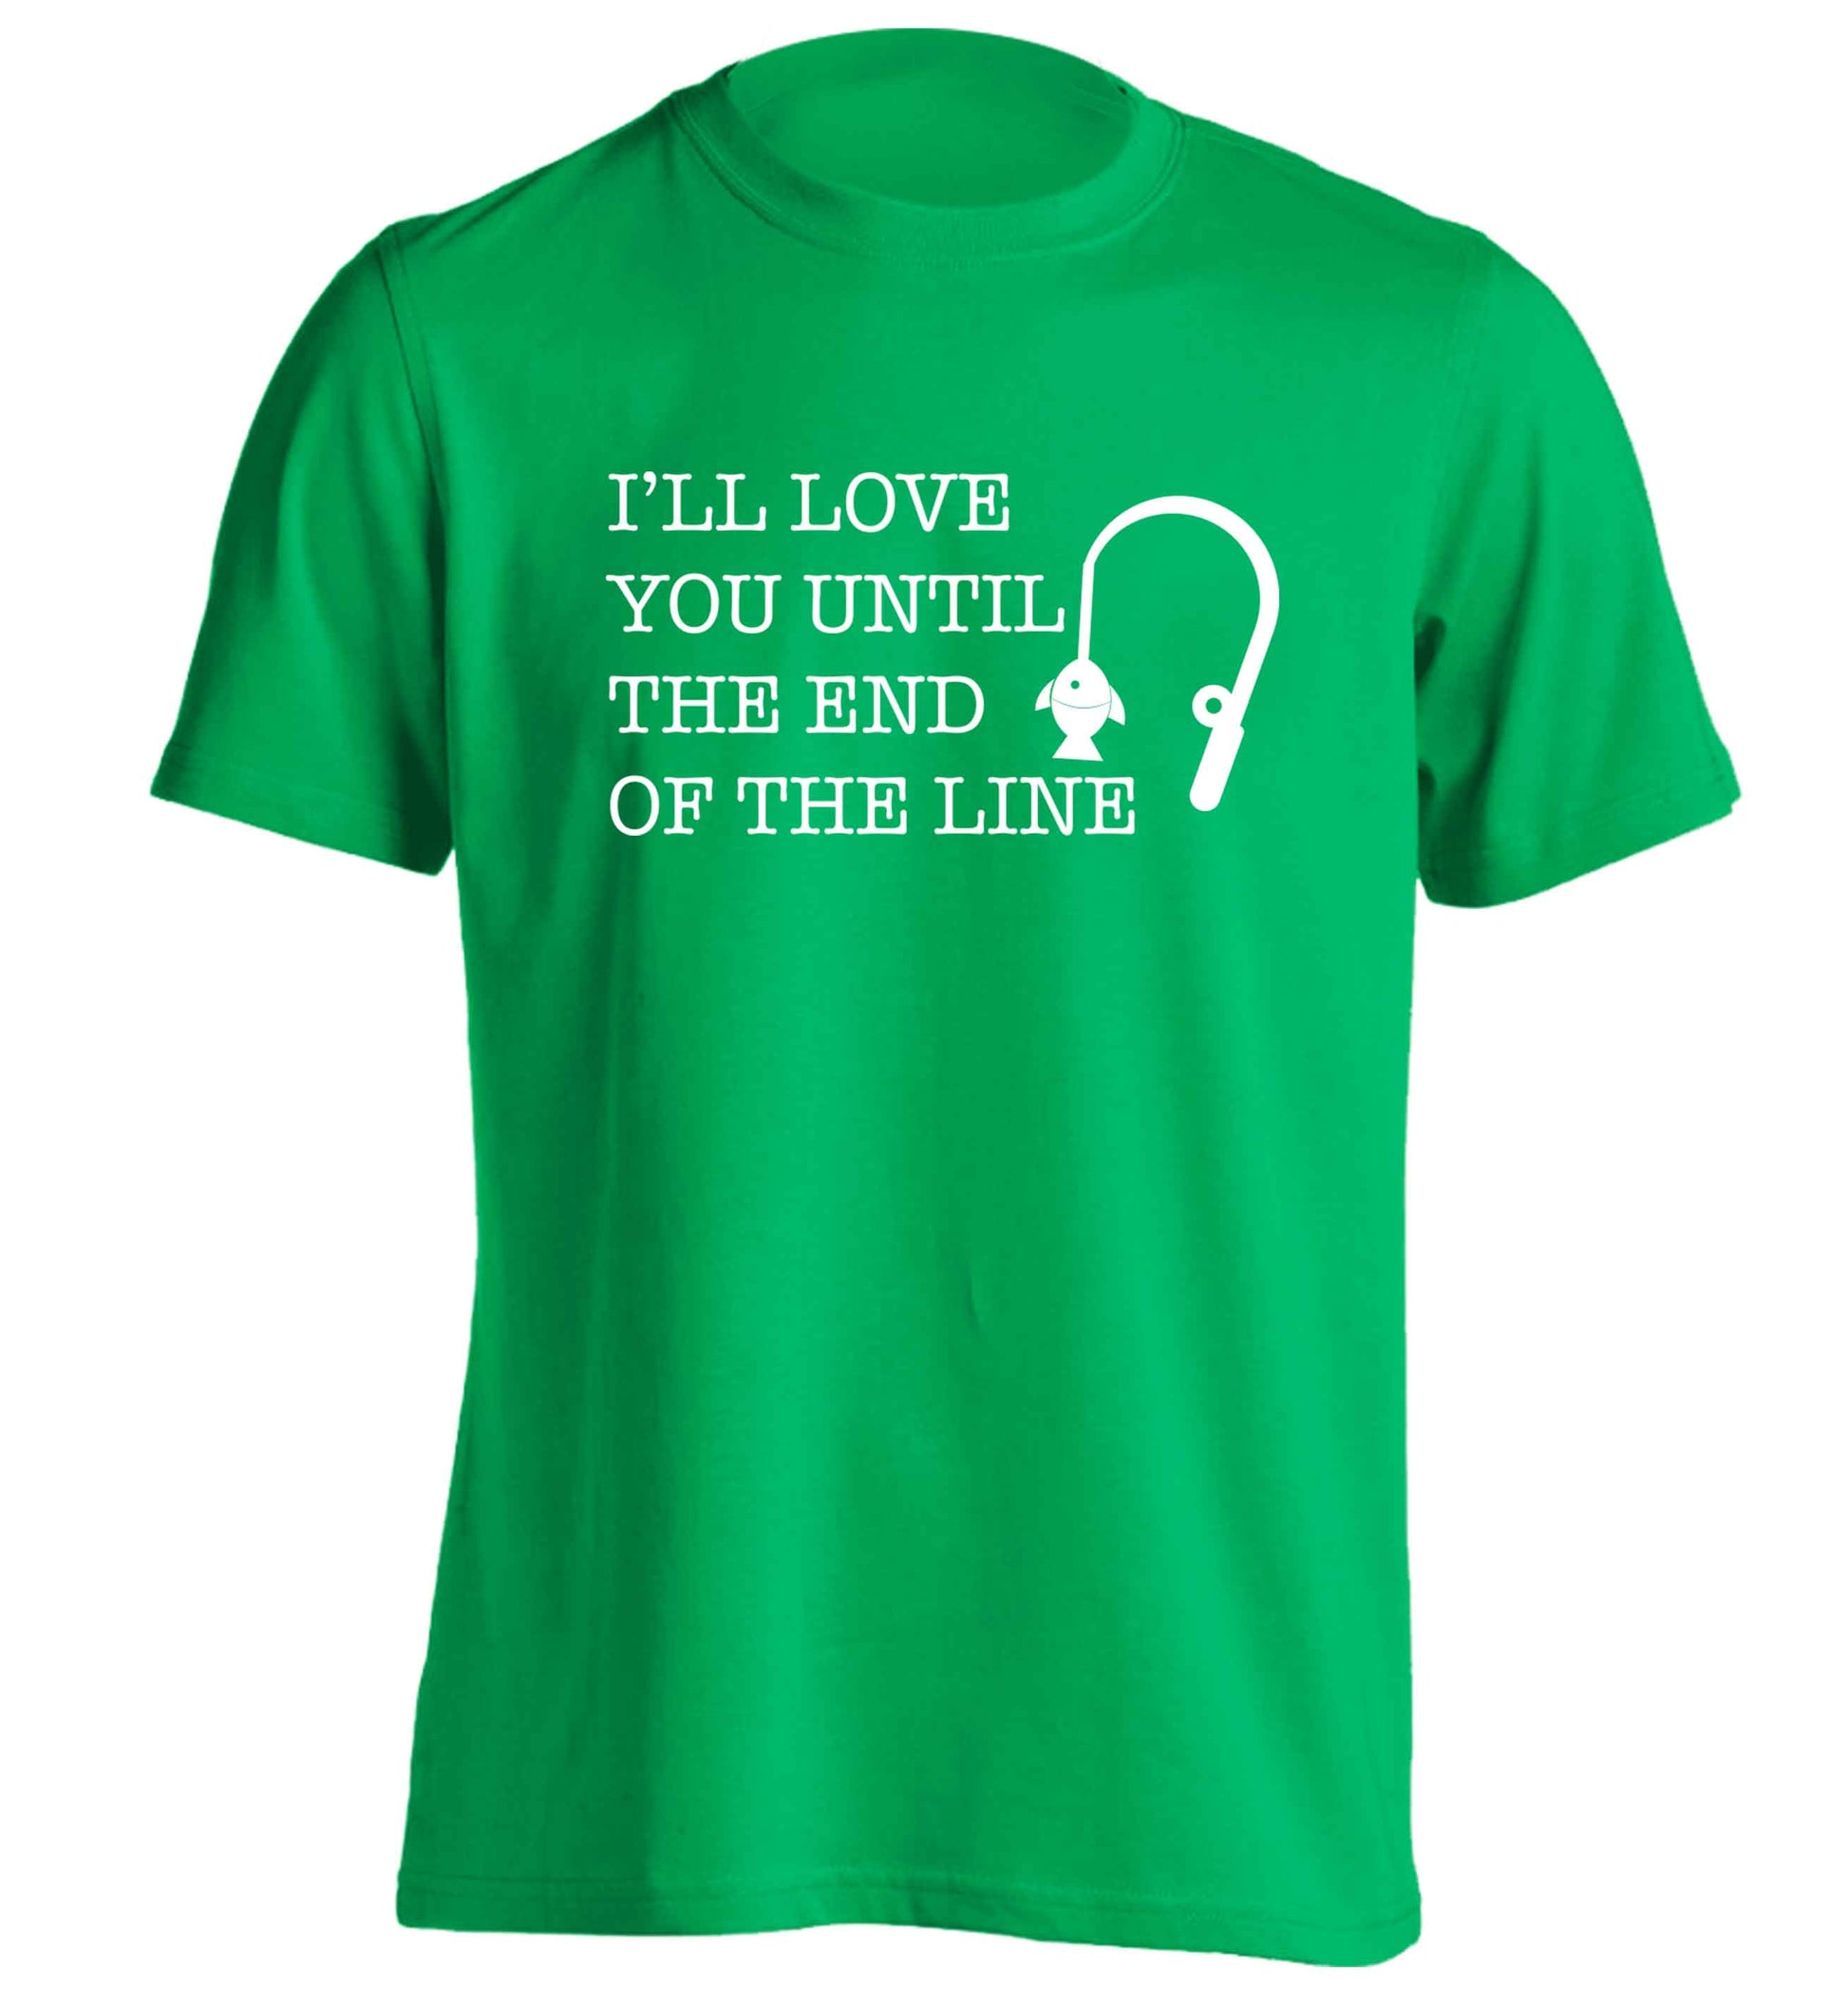 I'll love you until the end of the line adults unisex green Tshirt 2XL